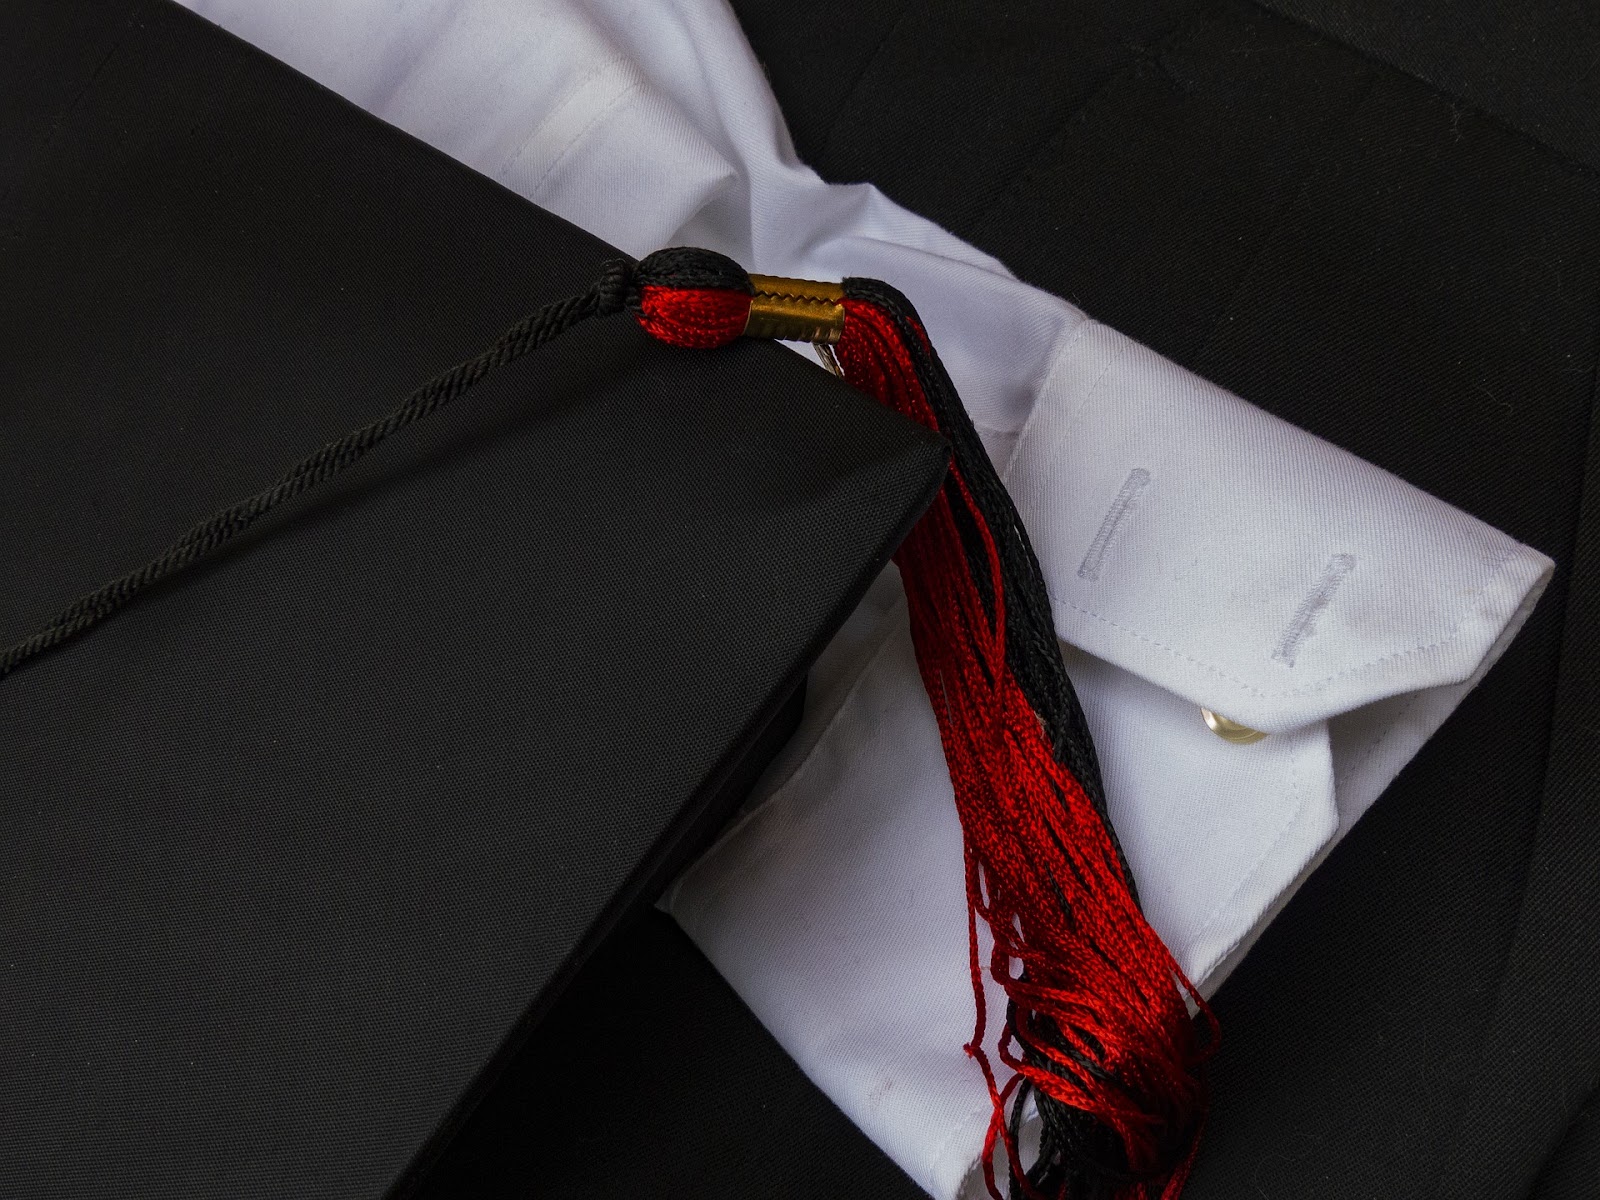 A picture of a graduation cap, tassel, and the cuff of a white dress shirt.